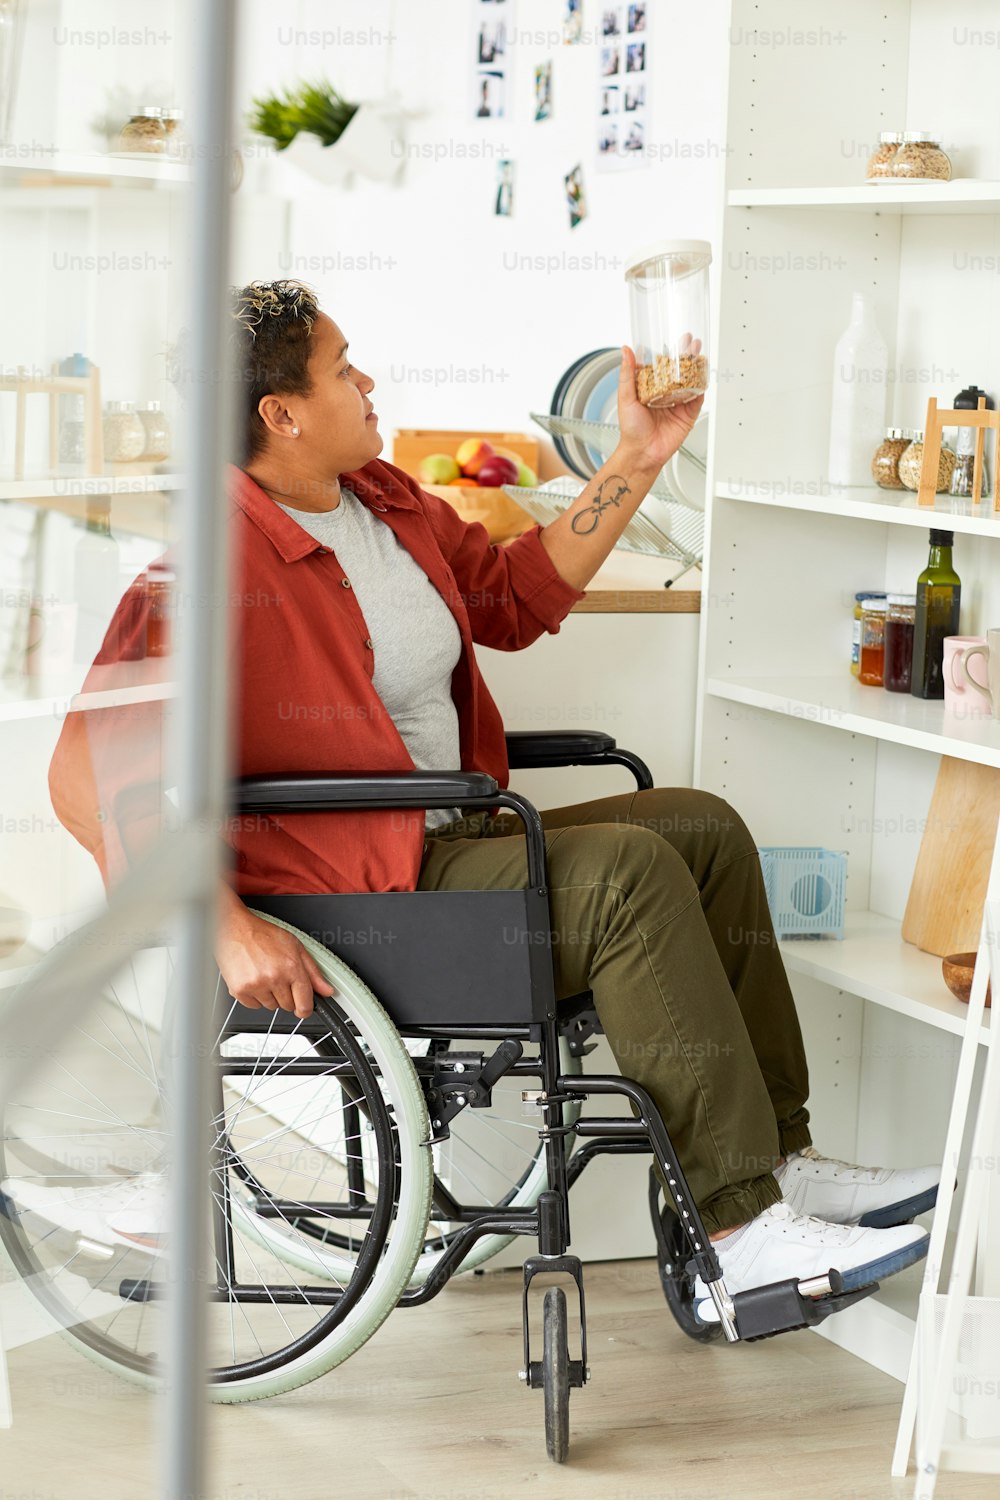 African disabled woman sitting in wheelchair near the shelves and looking at product in her hand in the kitchen